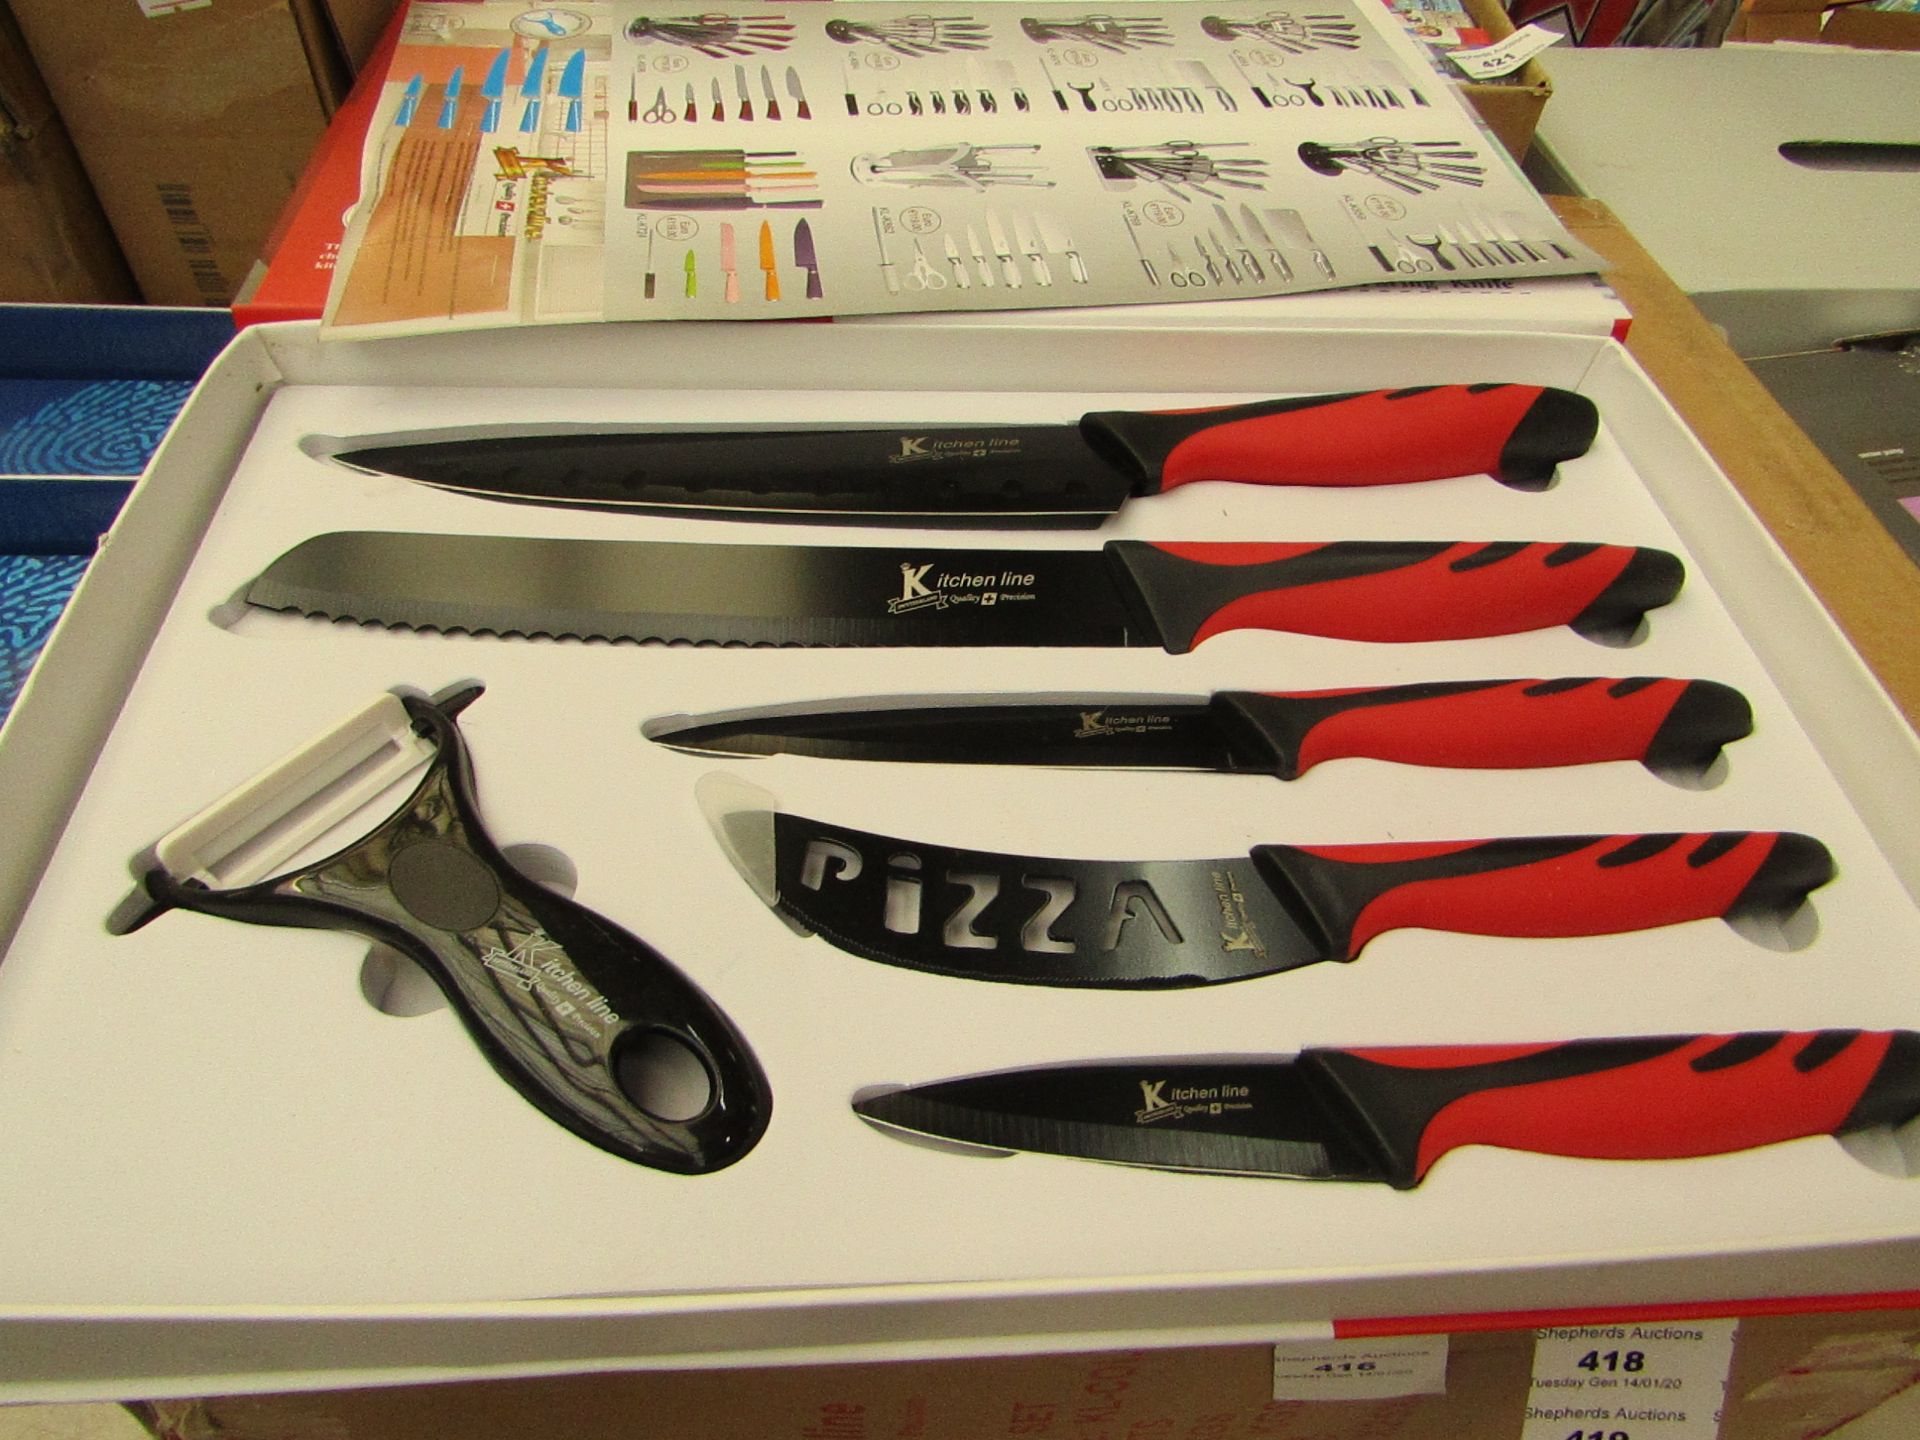 Kitchen Line 6 piece knife set, new and boxed.